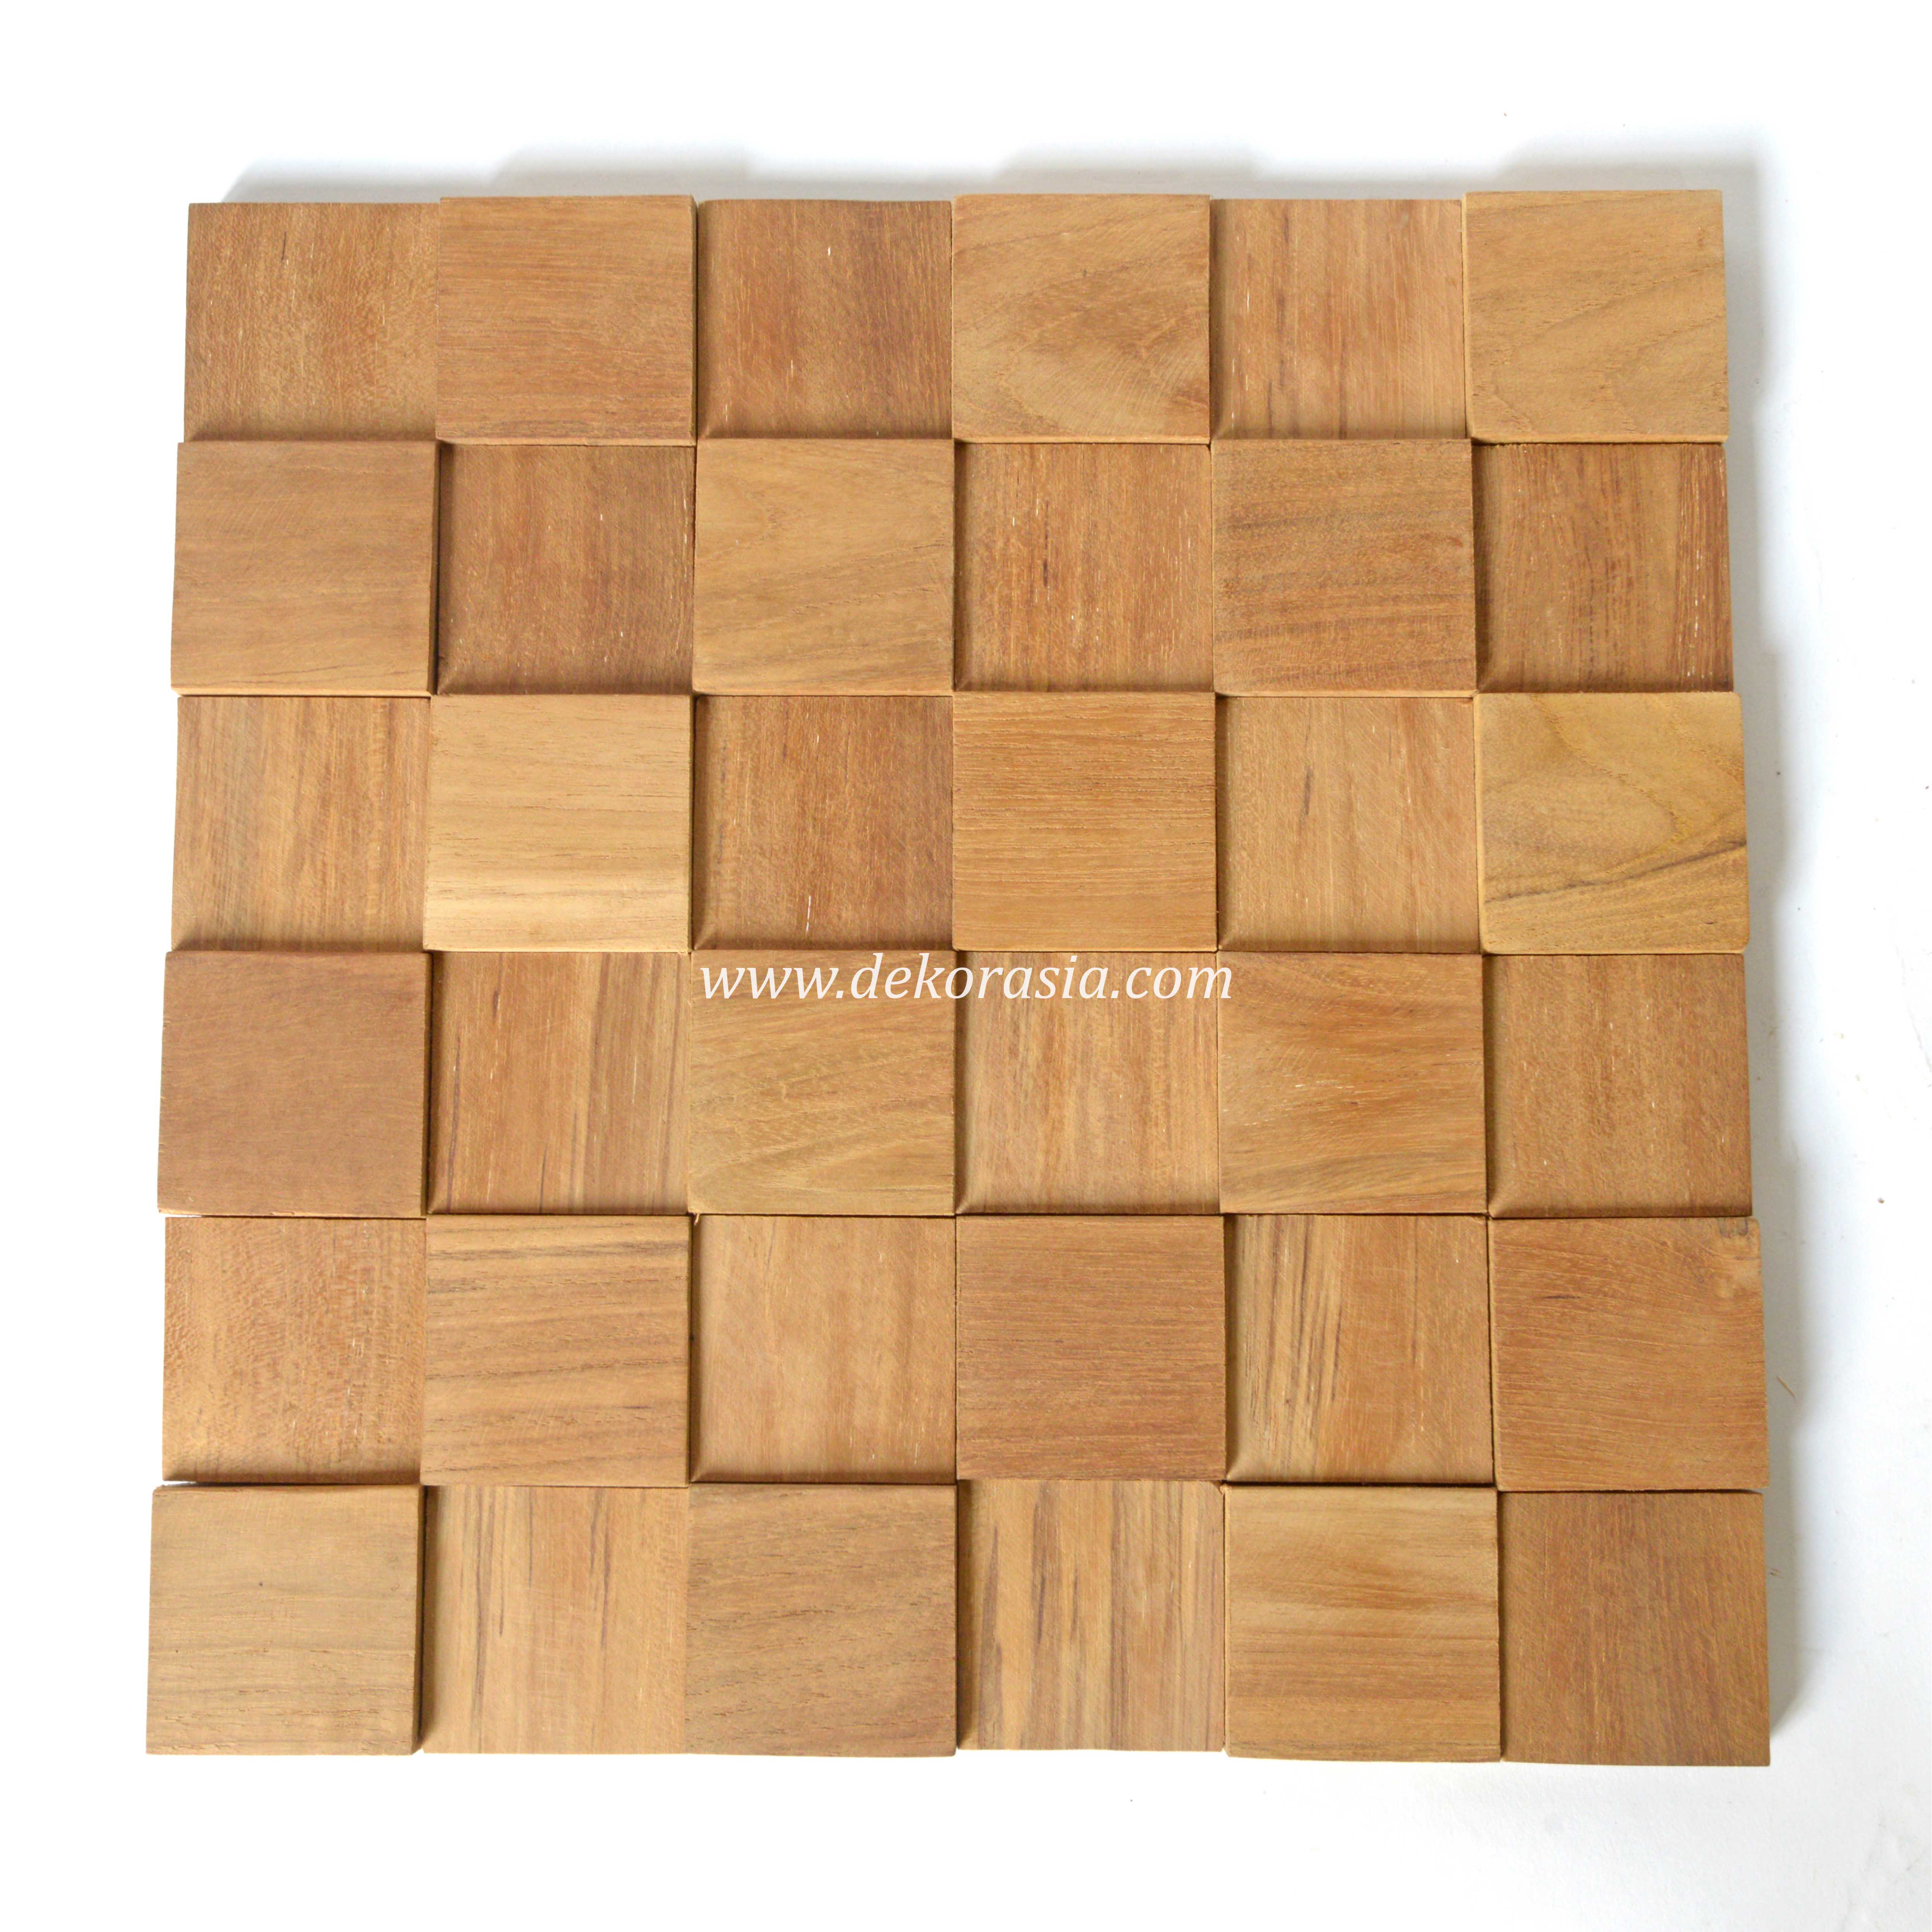 Top Quality Cube Teak for Interior/Exterior Wall Cladding